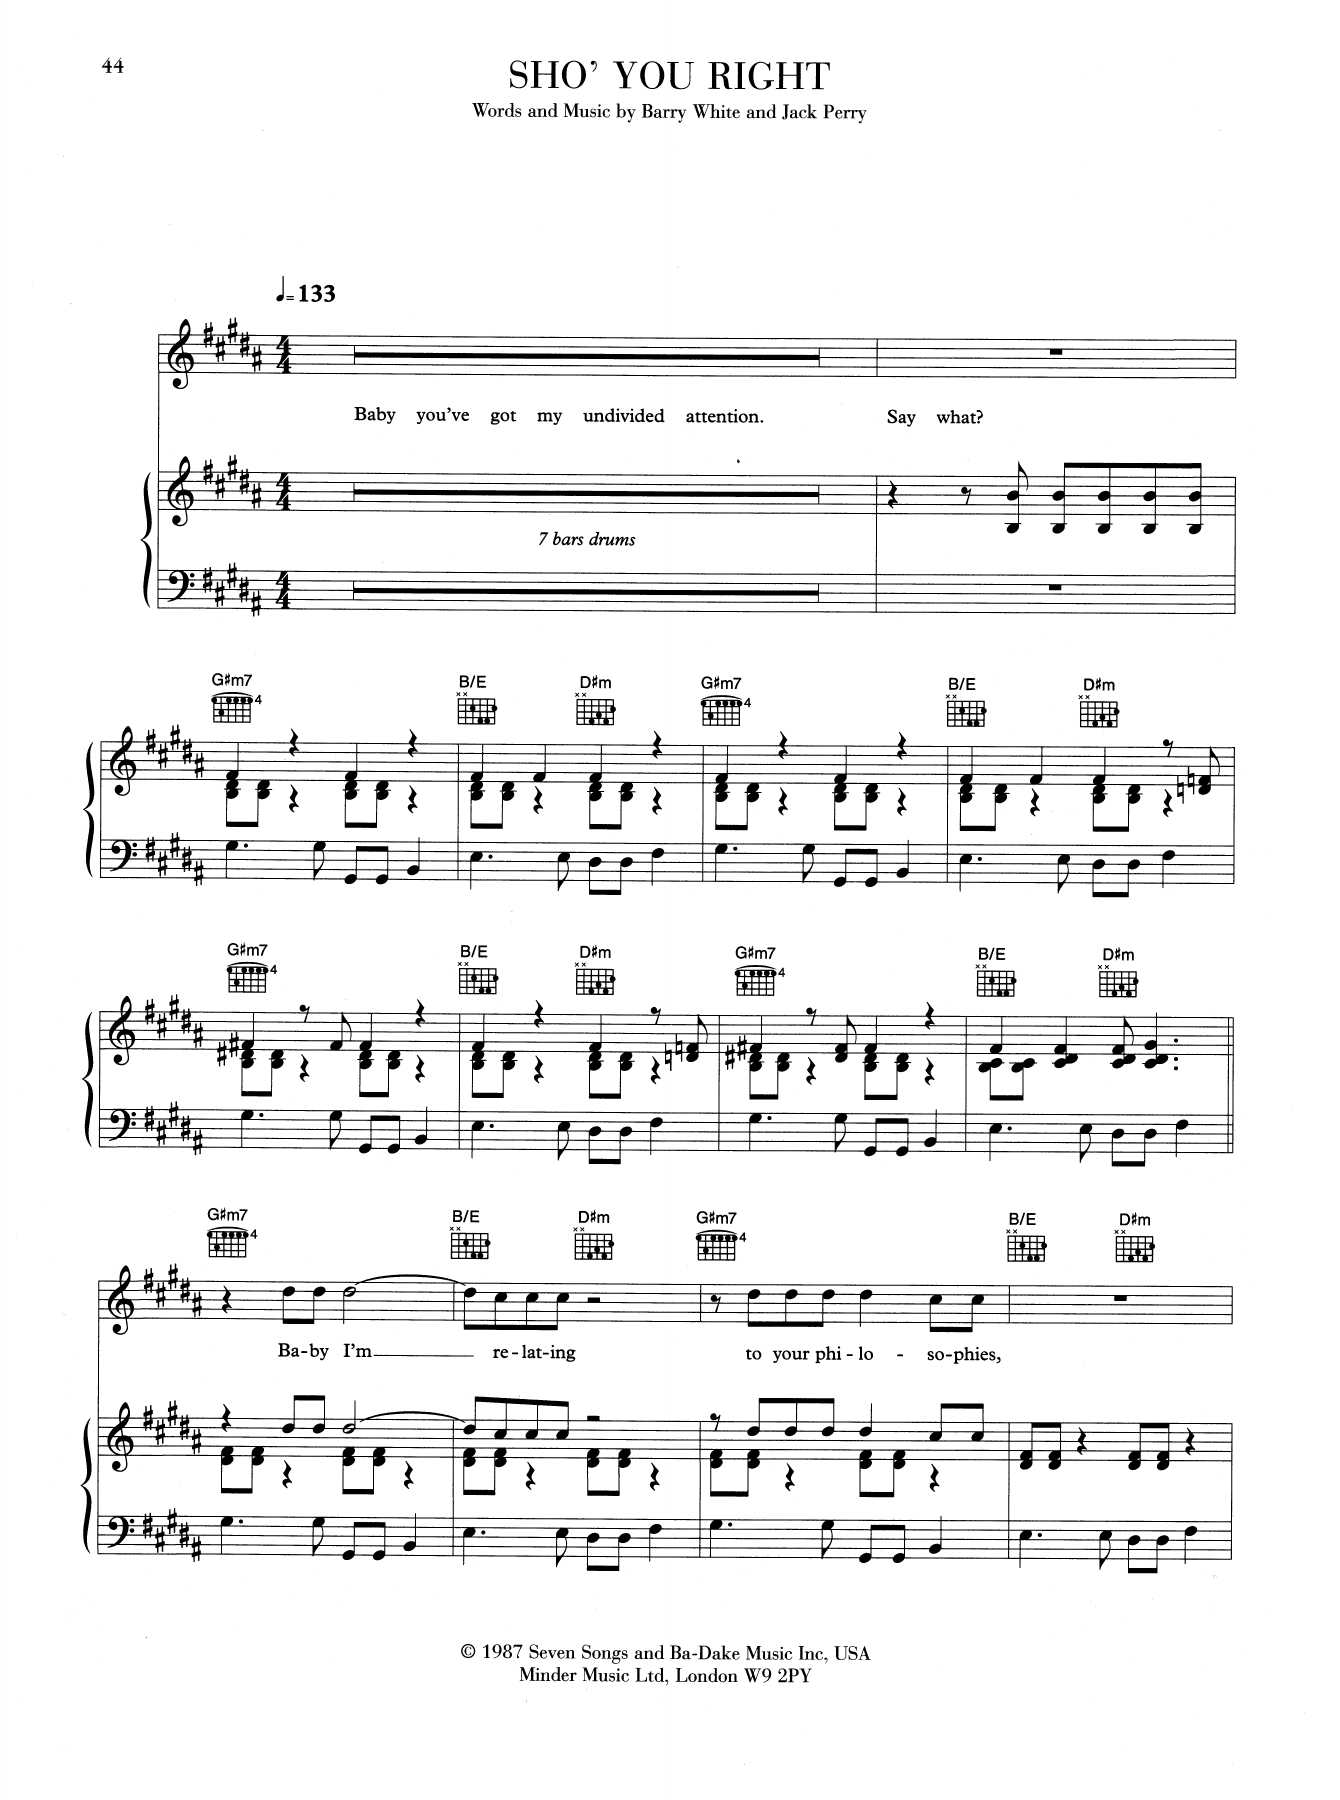 Download Barry White Sho' You Right Sheet Music